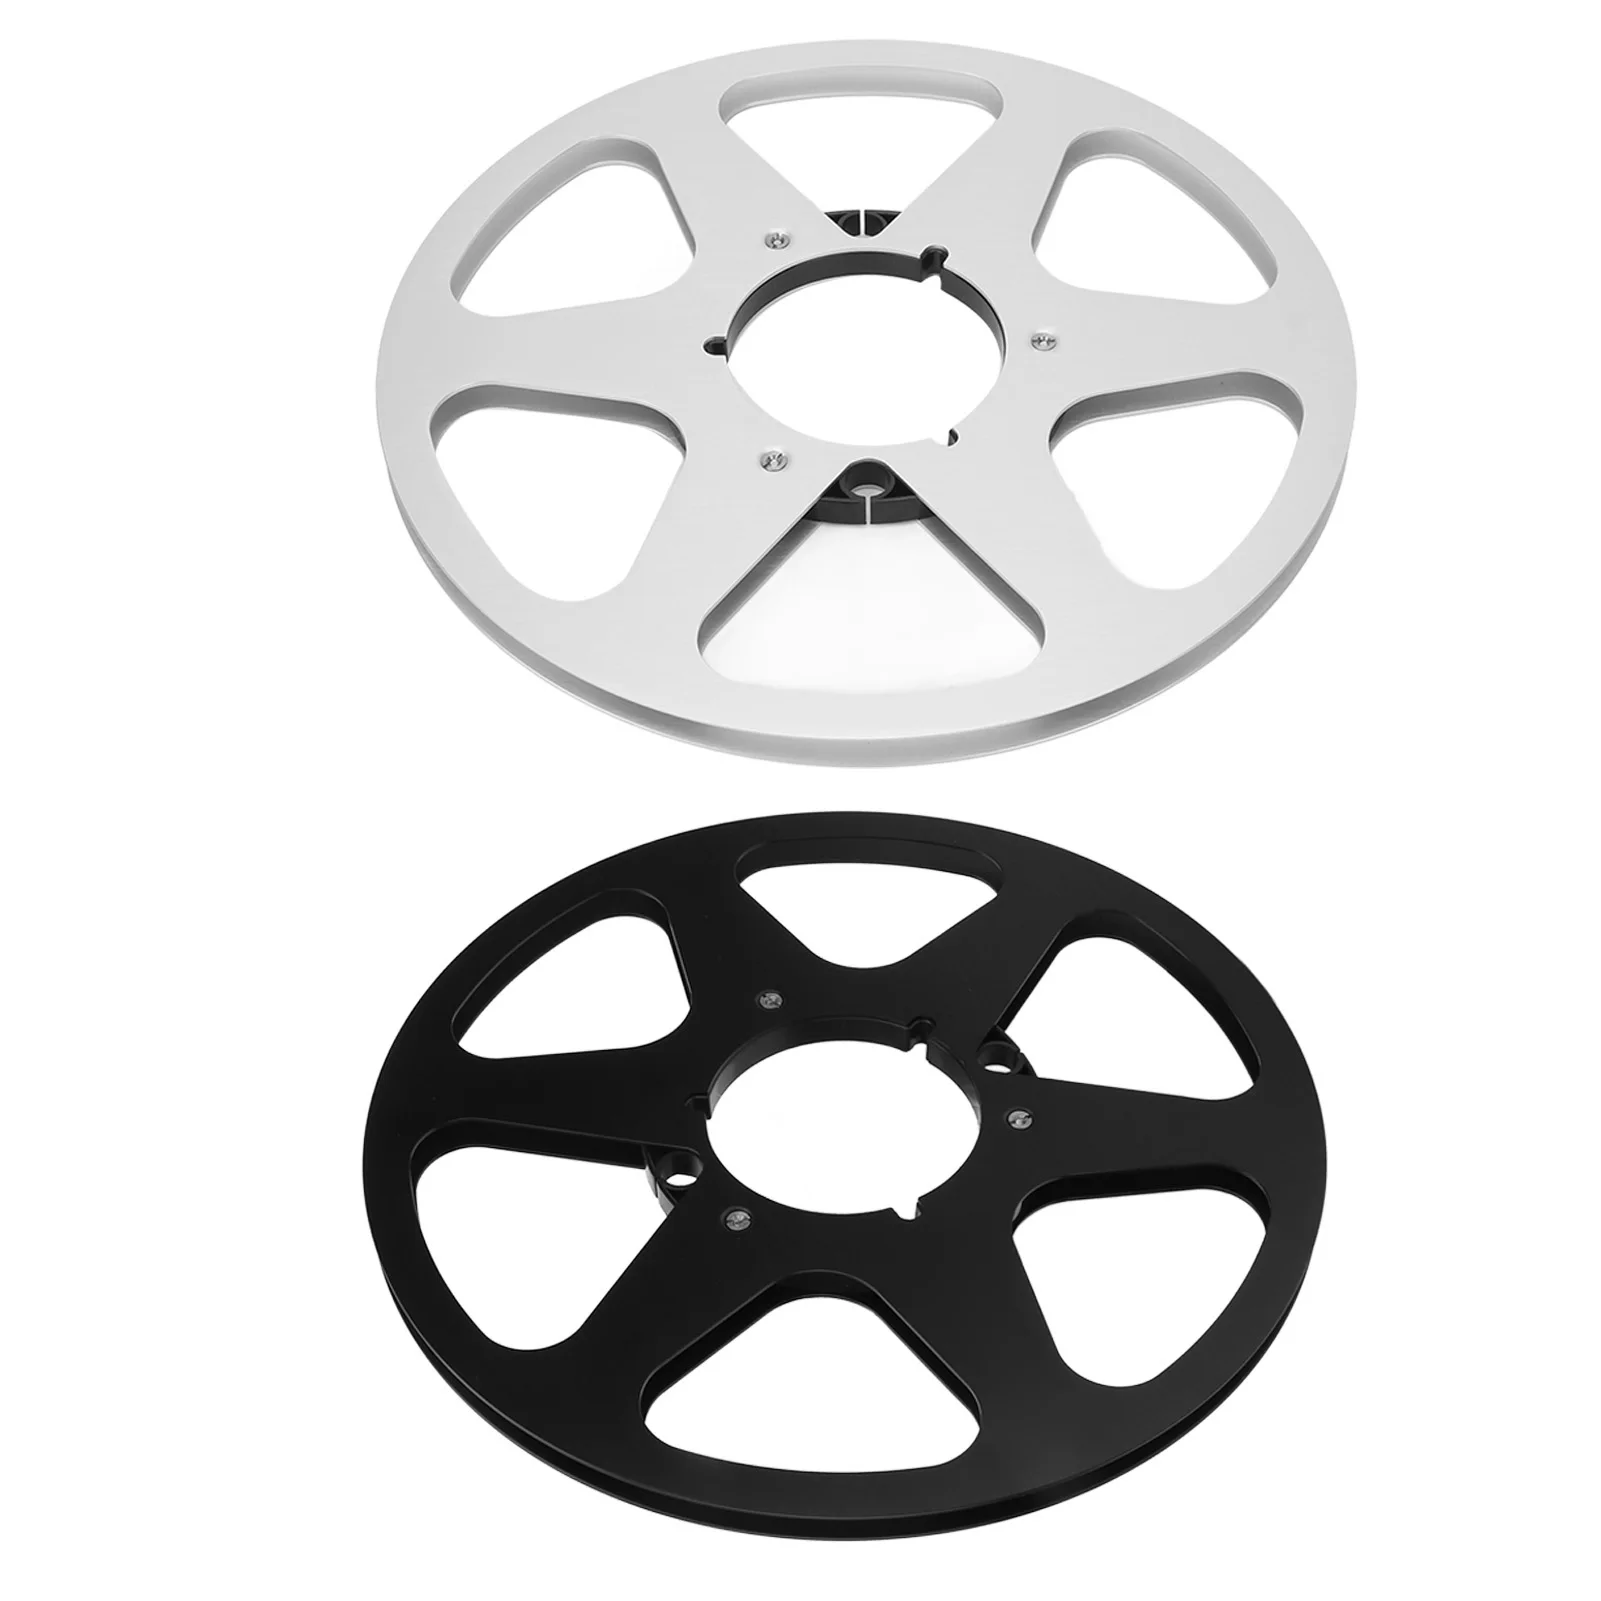 10 Inch Open Reel Takeup Reel 6 Holes Sound Aluminum Takeup Reel Empty Reel  for 1/4 Inch Tapes - AliExpress